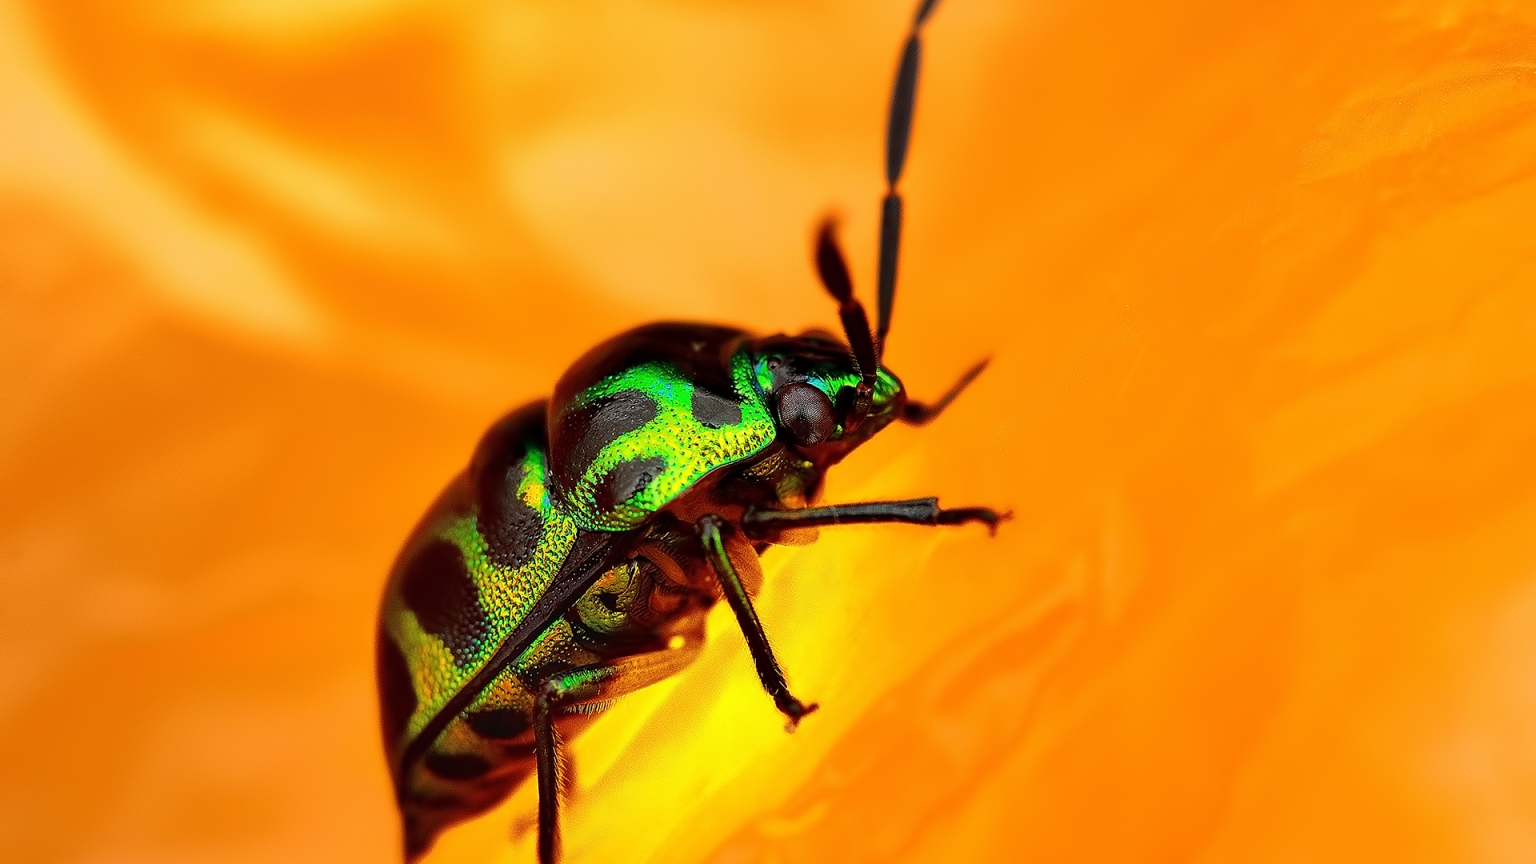 Green Beetle for 1536 x 864 HDTV resolution